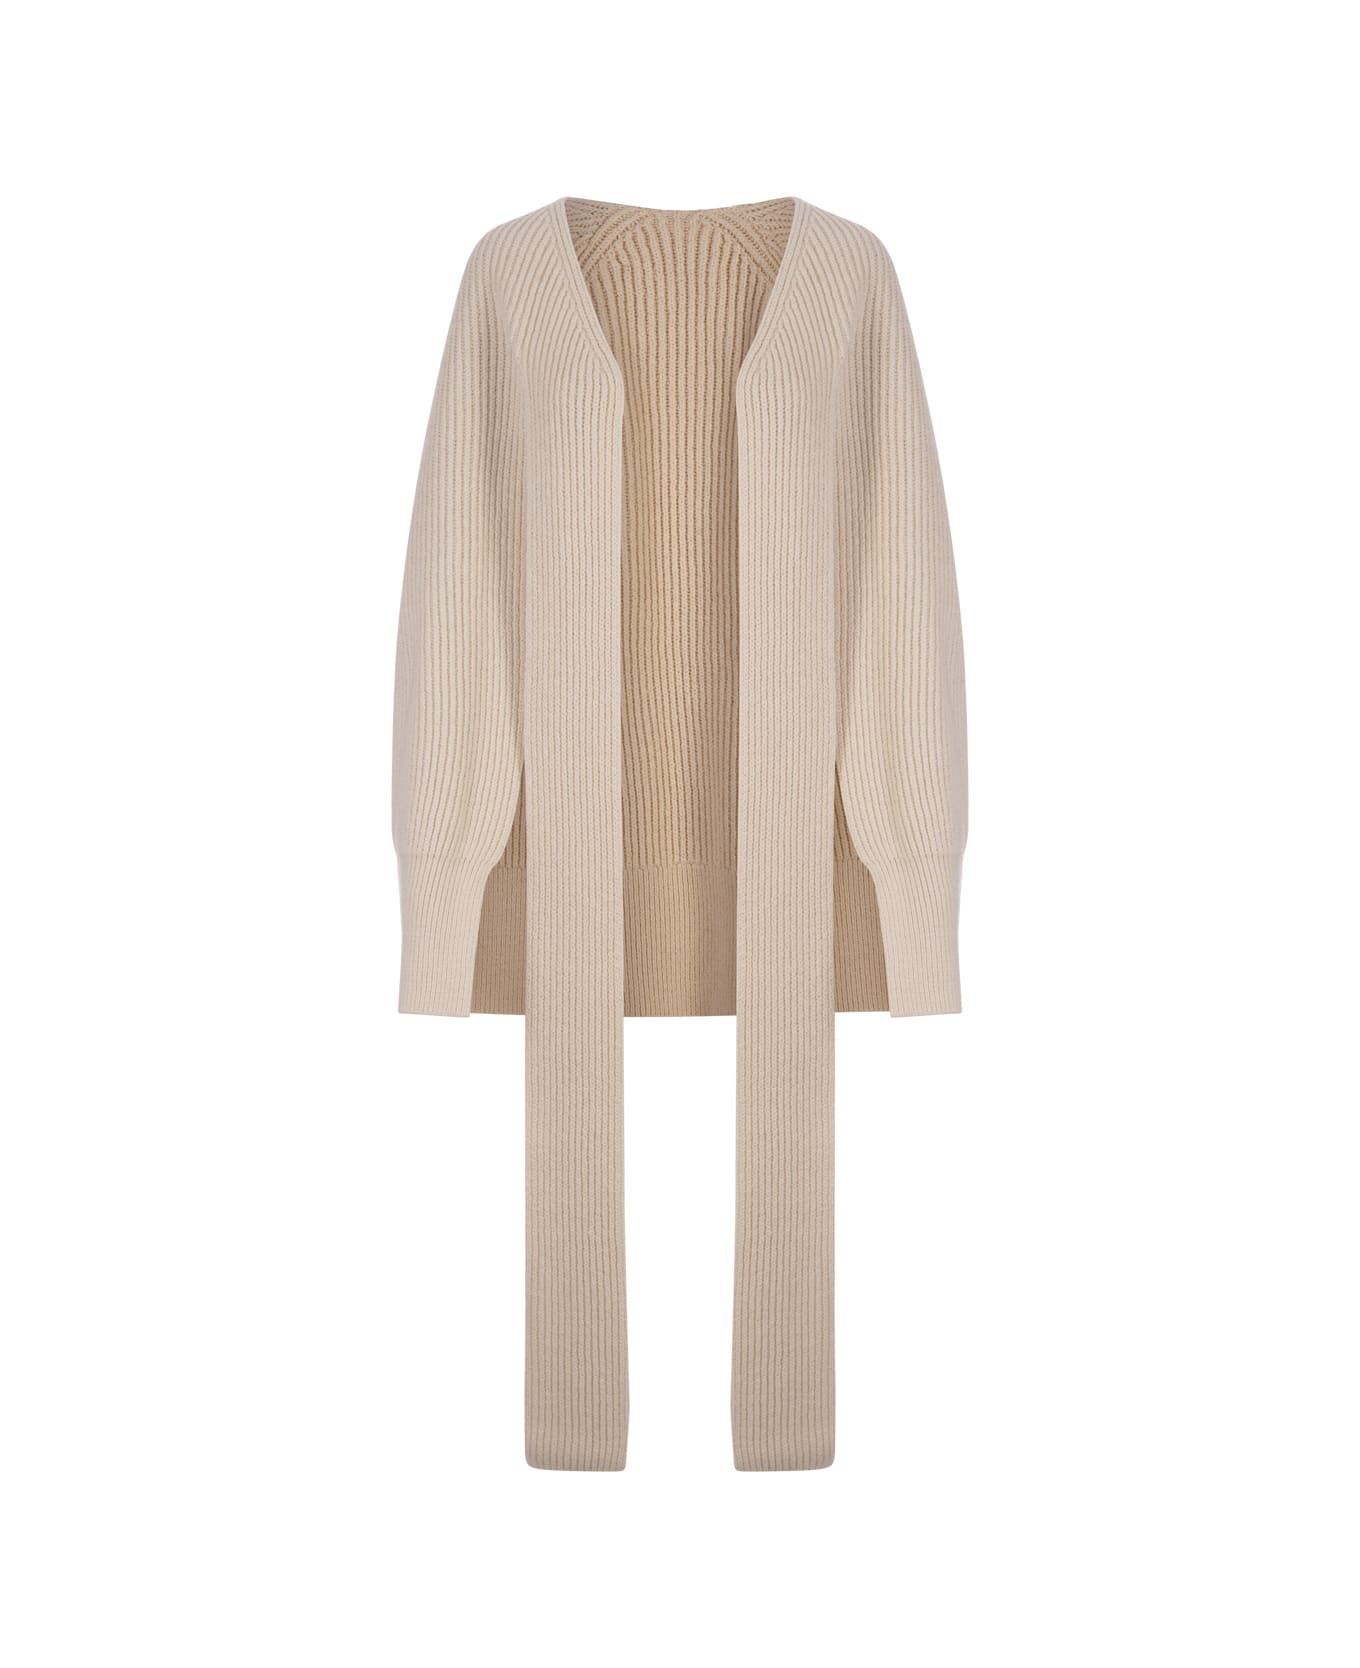 Jil Sander Ribbed Structured Cape In Coconut White - White